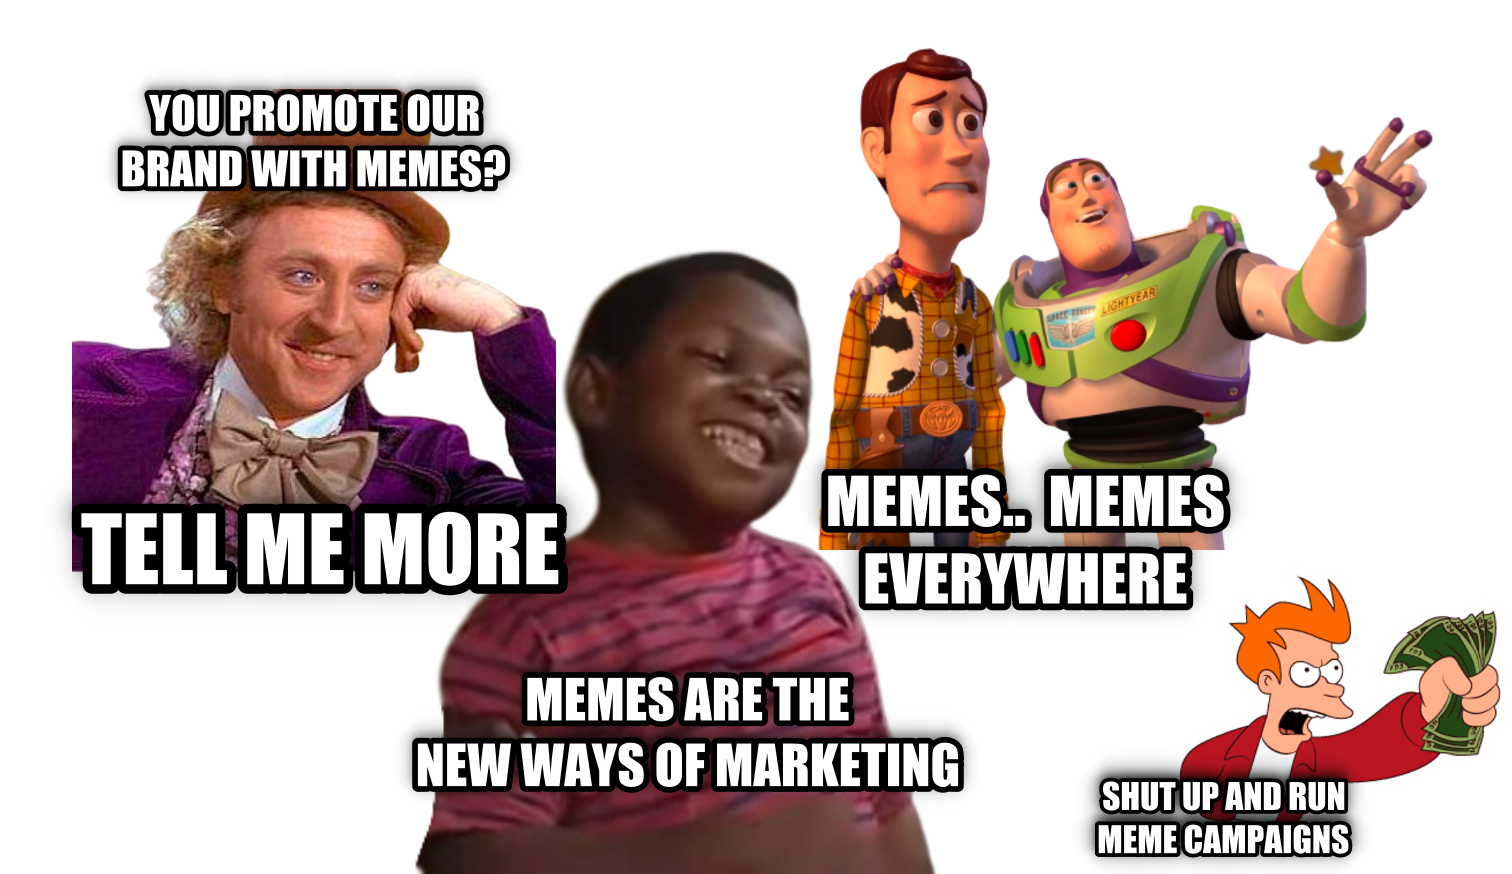 meme campaigns for corporate brands